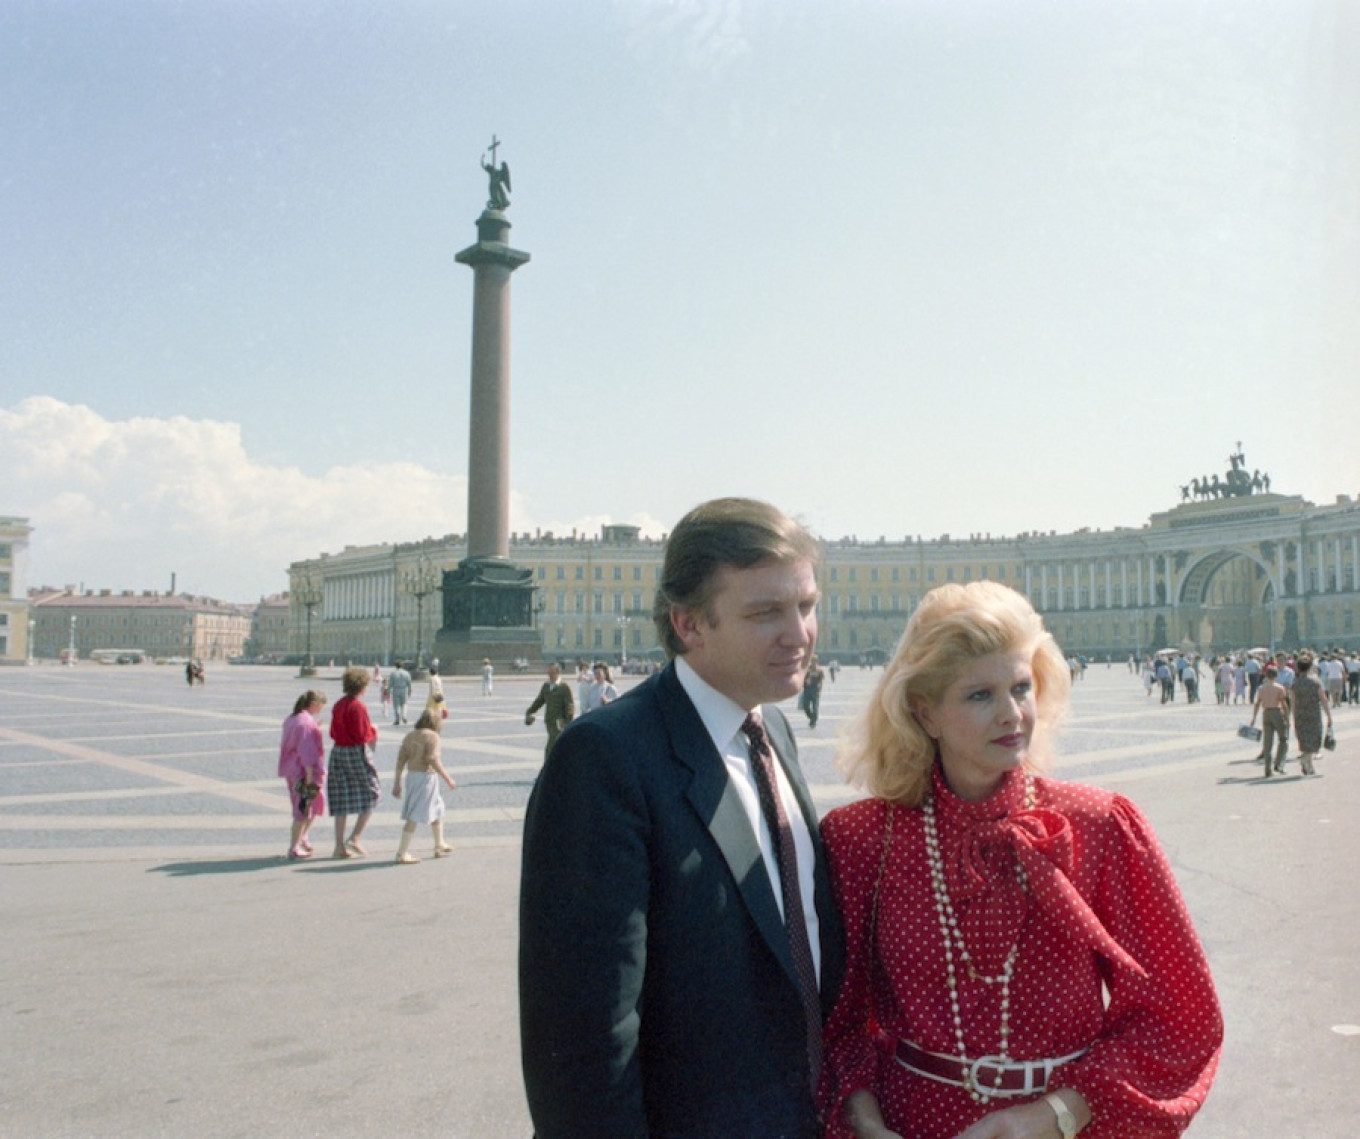 
					Donald Trump and ex-wife Ivana visit Palace Square in St.Petersburg, USSR. Trump has described Russian President Vladimir Putin as a "real leader."					 					Maxim Blokhin / TASS				